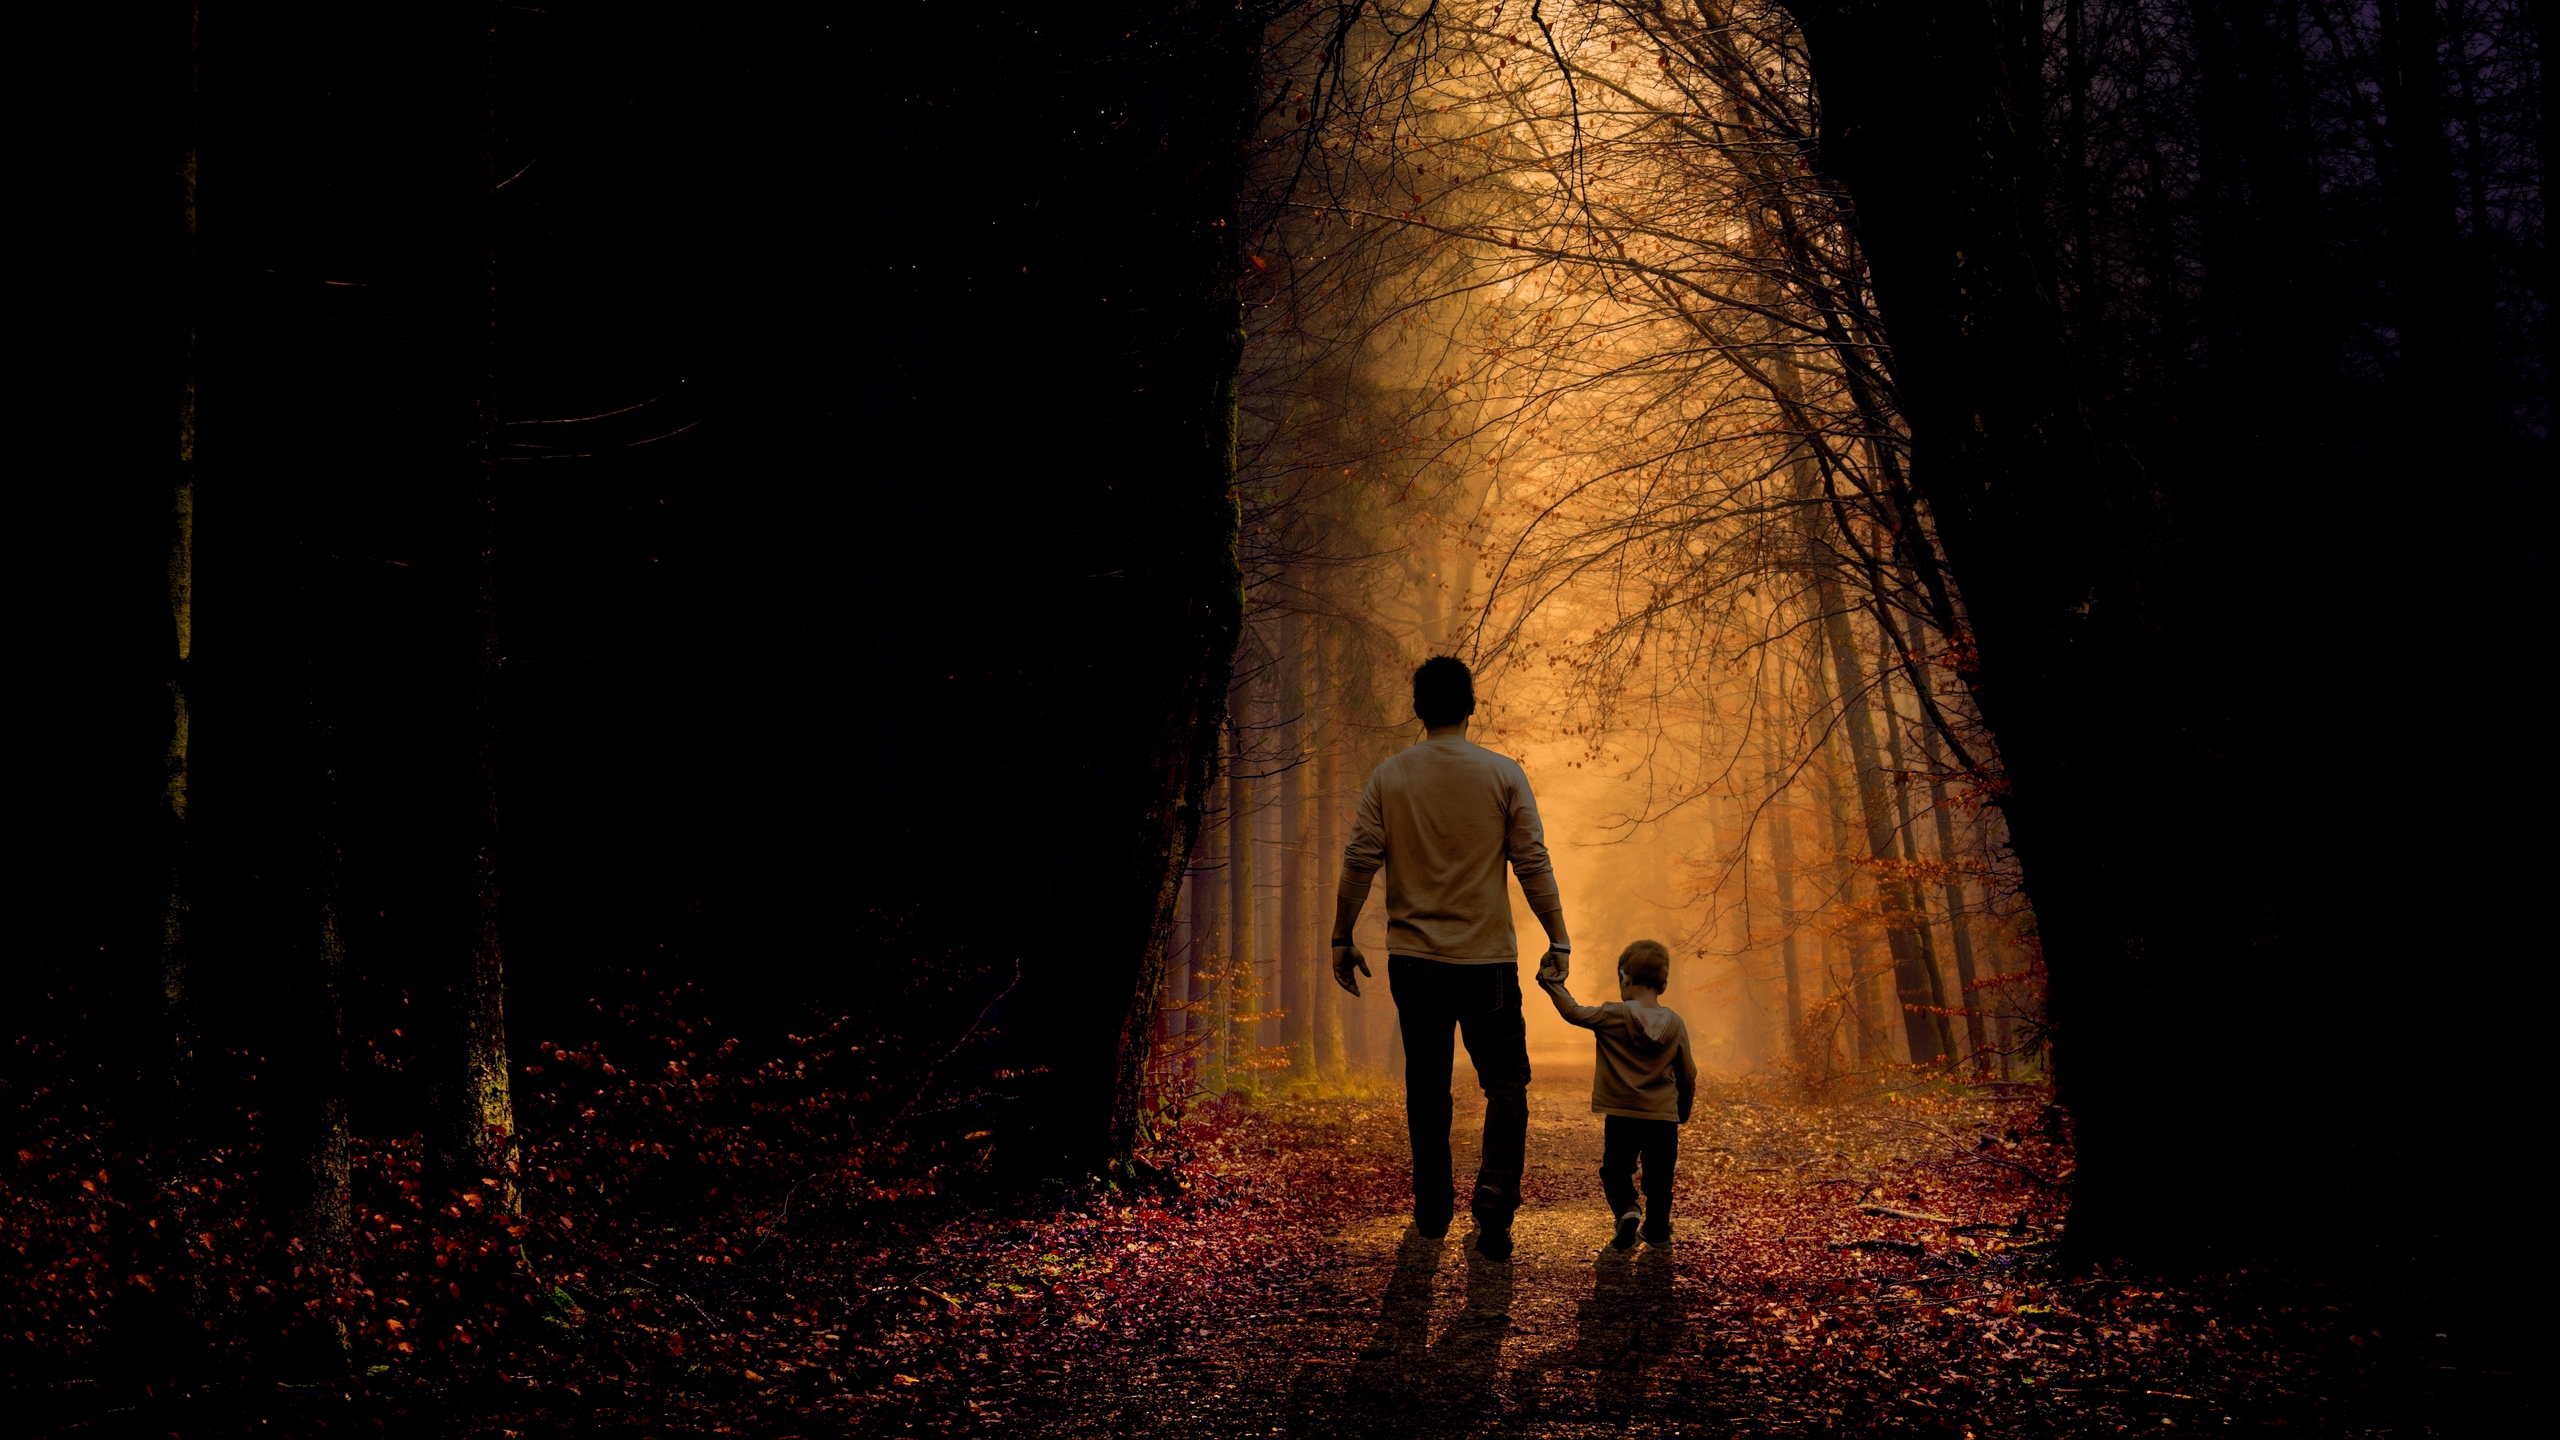 Download wallpaper 2560x1440 father, son, family, child, forest